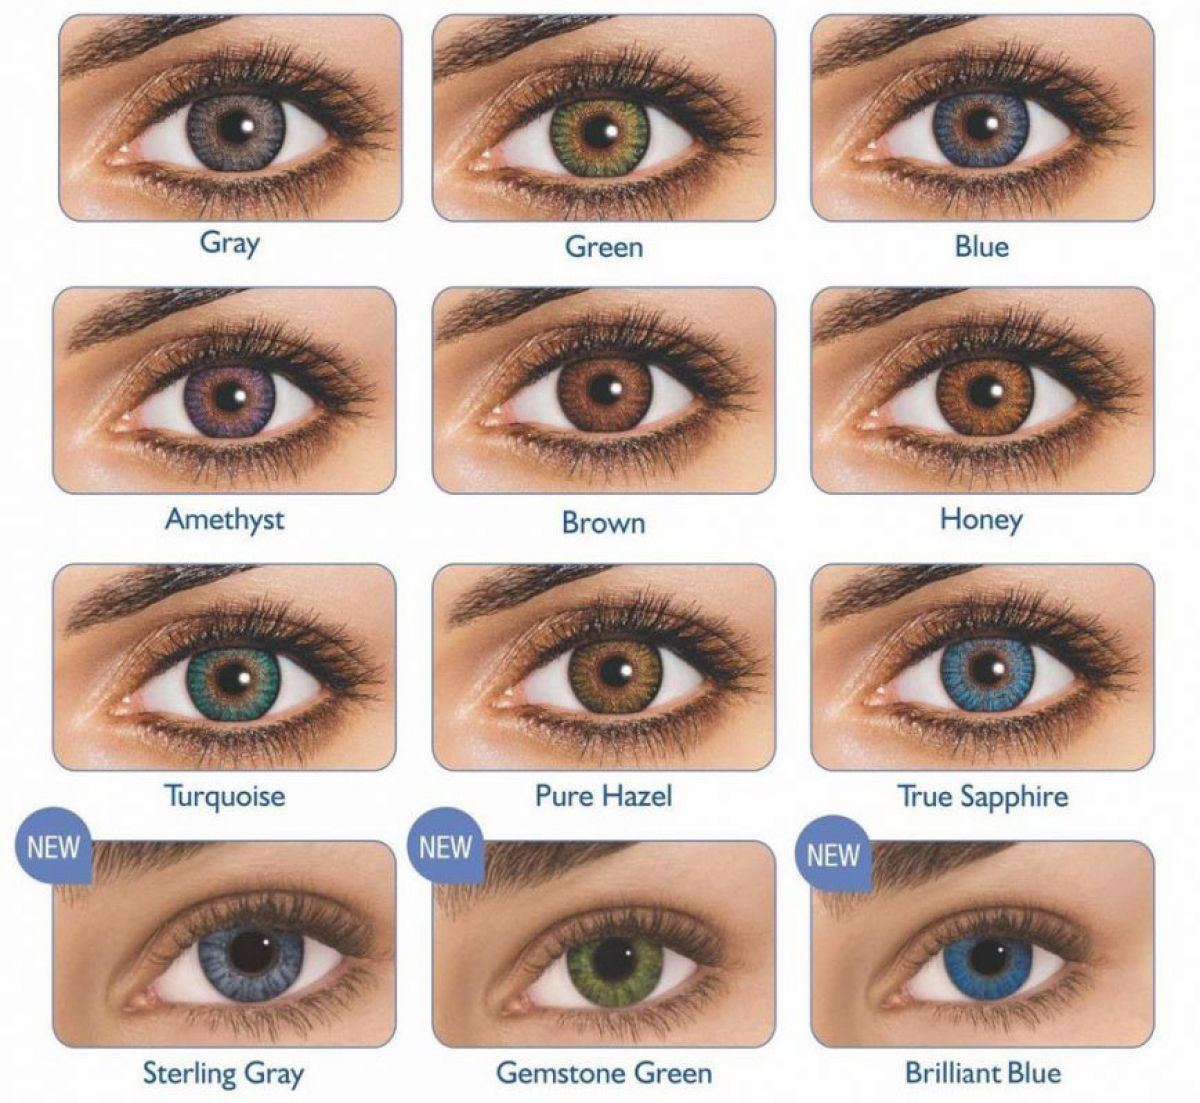 FRESHLOOK COLORBLENDS MONHTLY DISPOSABLE COLORED CONTACT LENSES (2 LENSES)